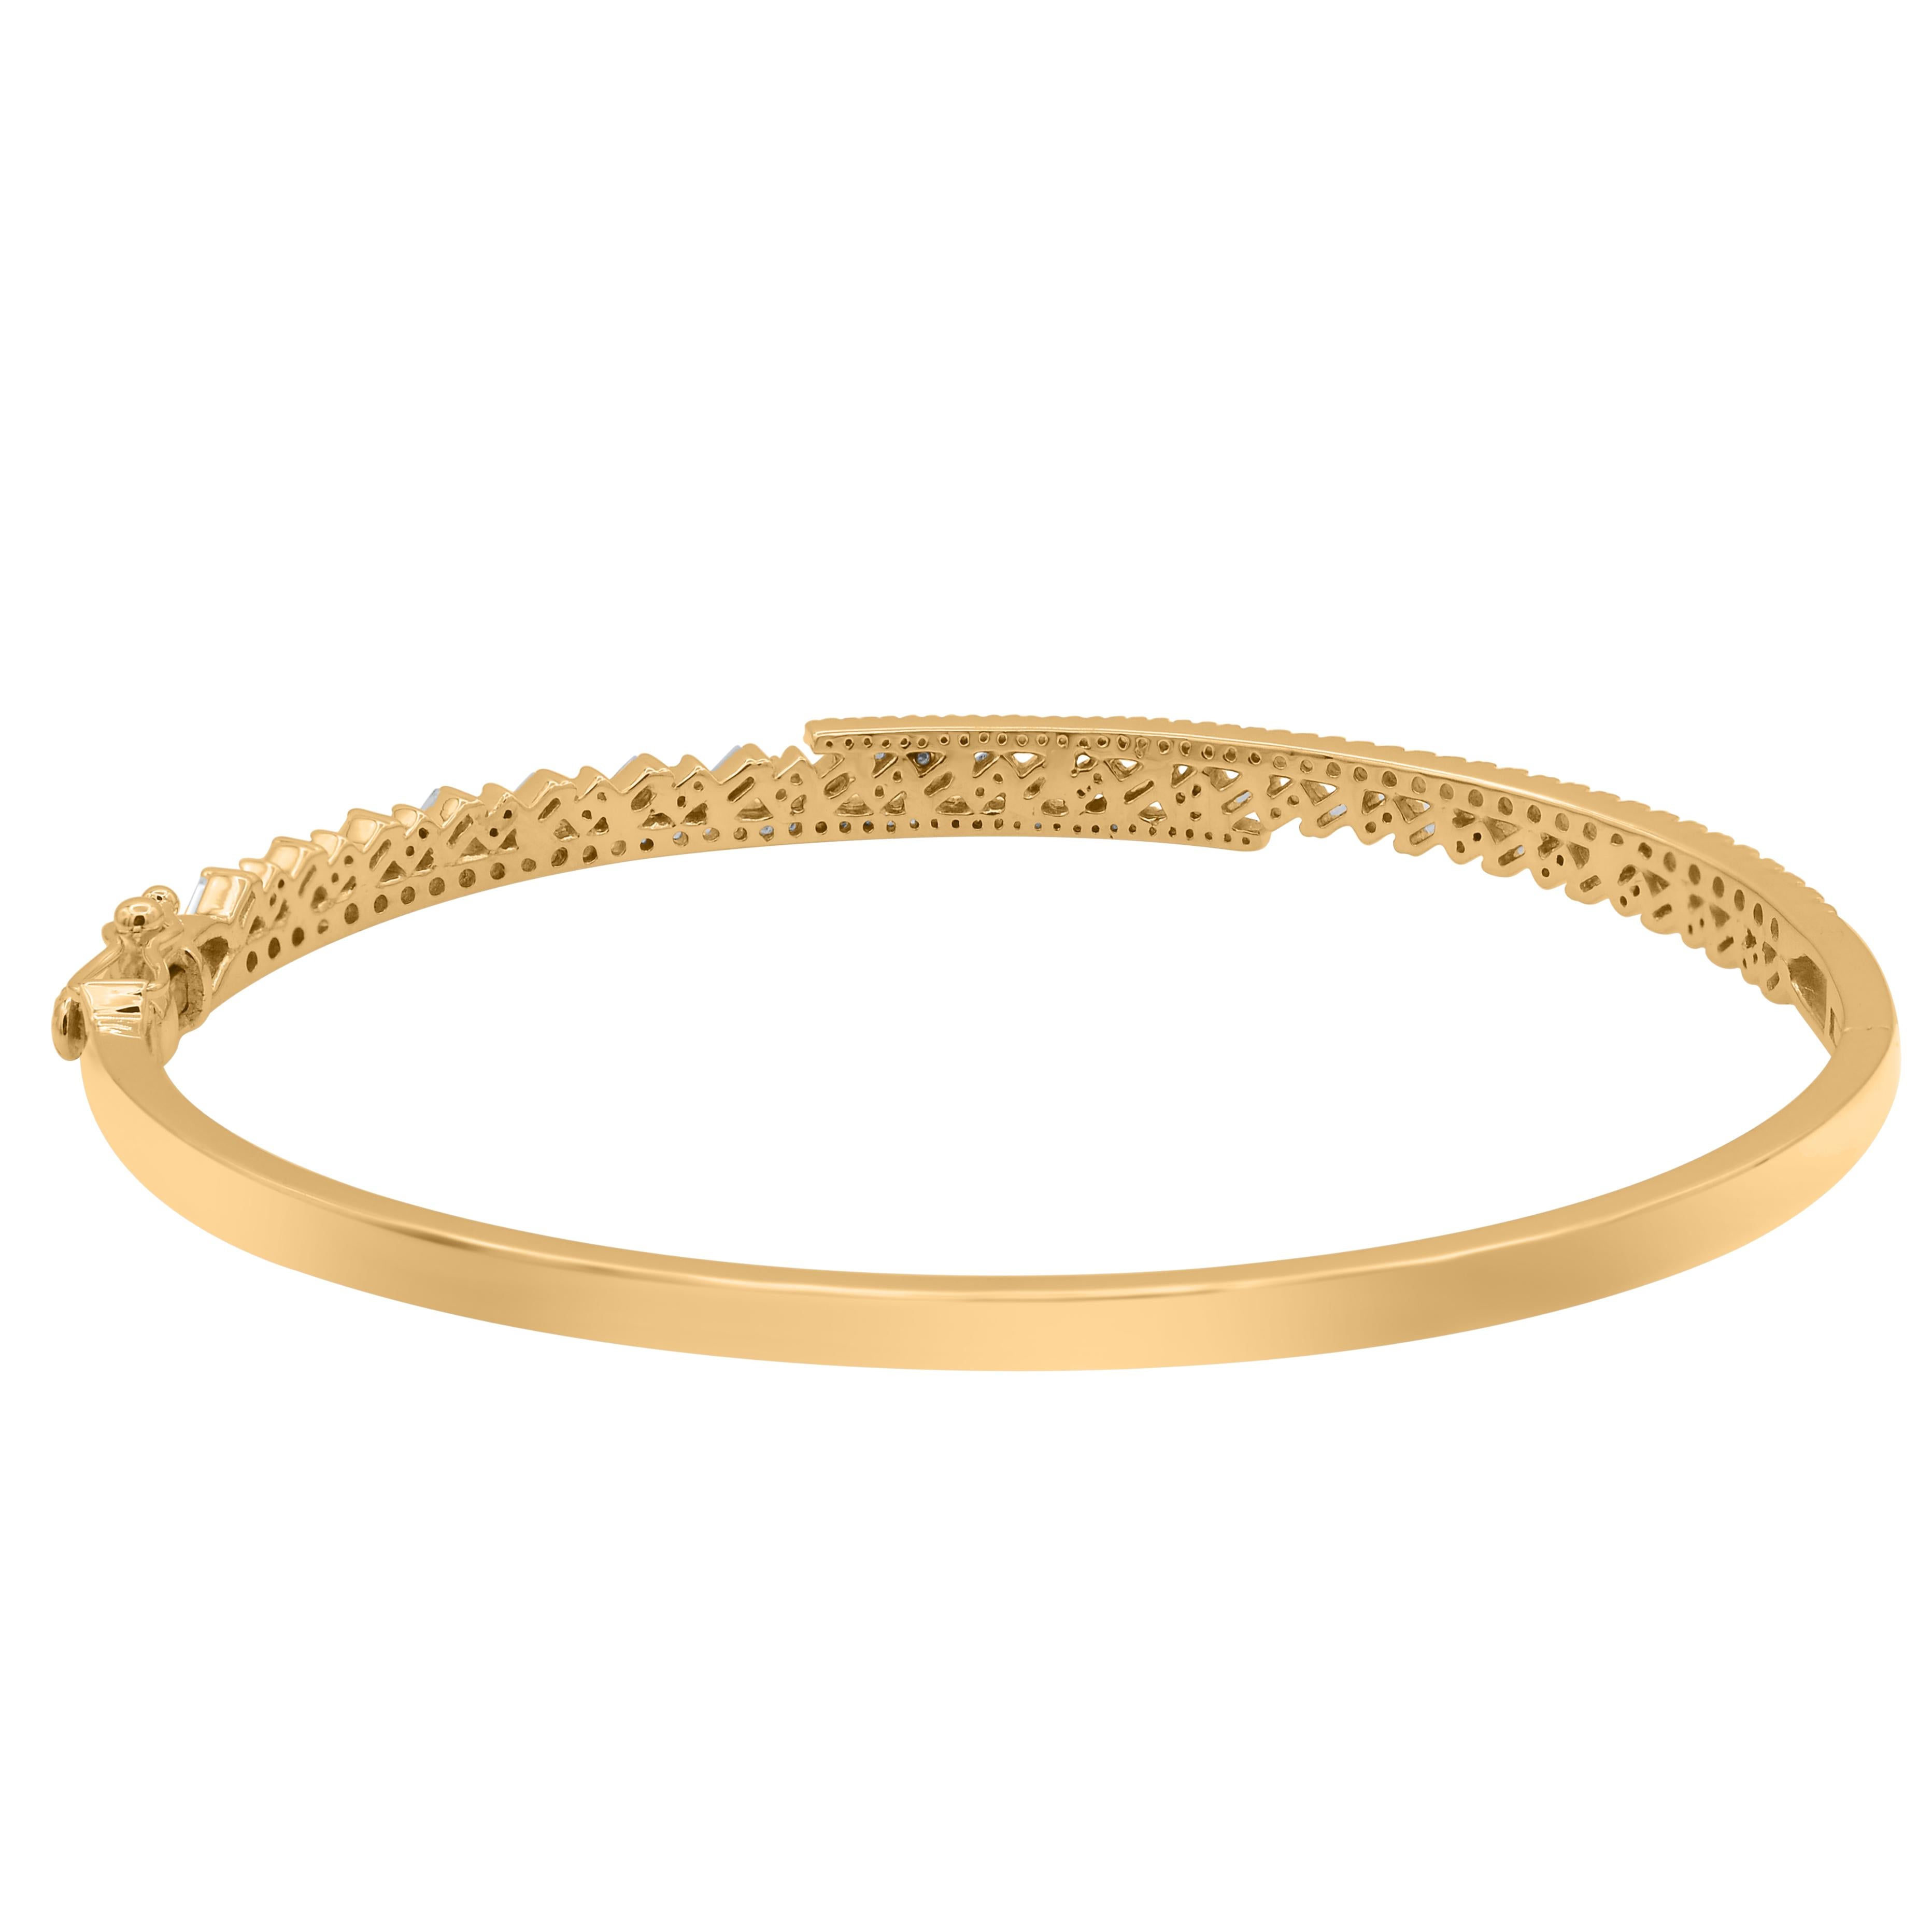 Contemporary TJD 1.0 Ct Natural Round & Baguette Diamond Bangle Bracelet in 14KT Yellow Gold For Sale